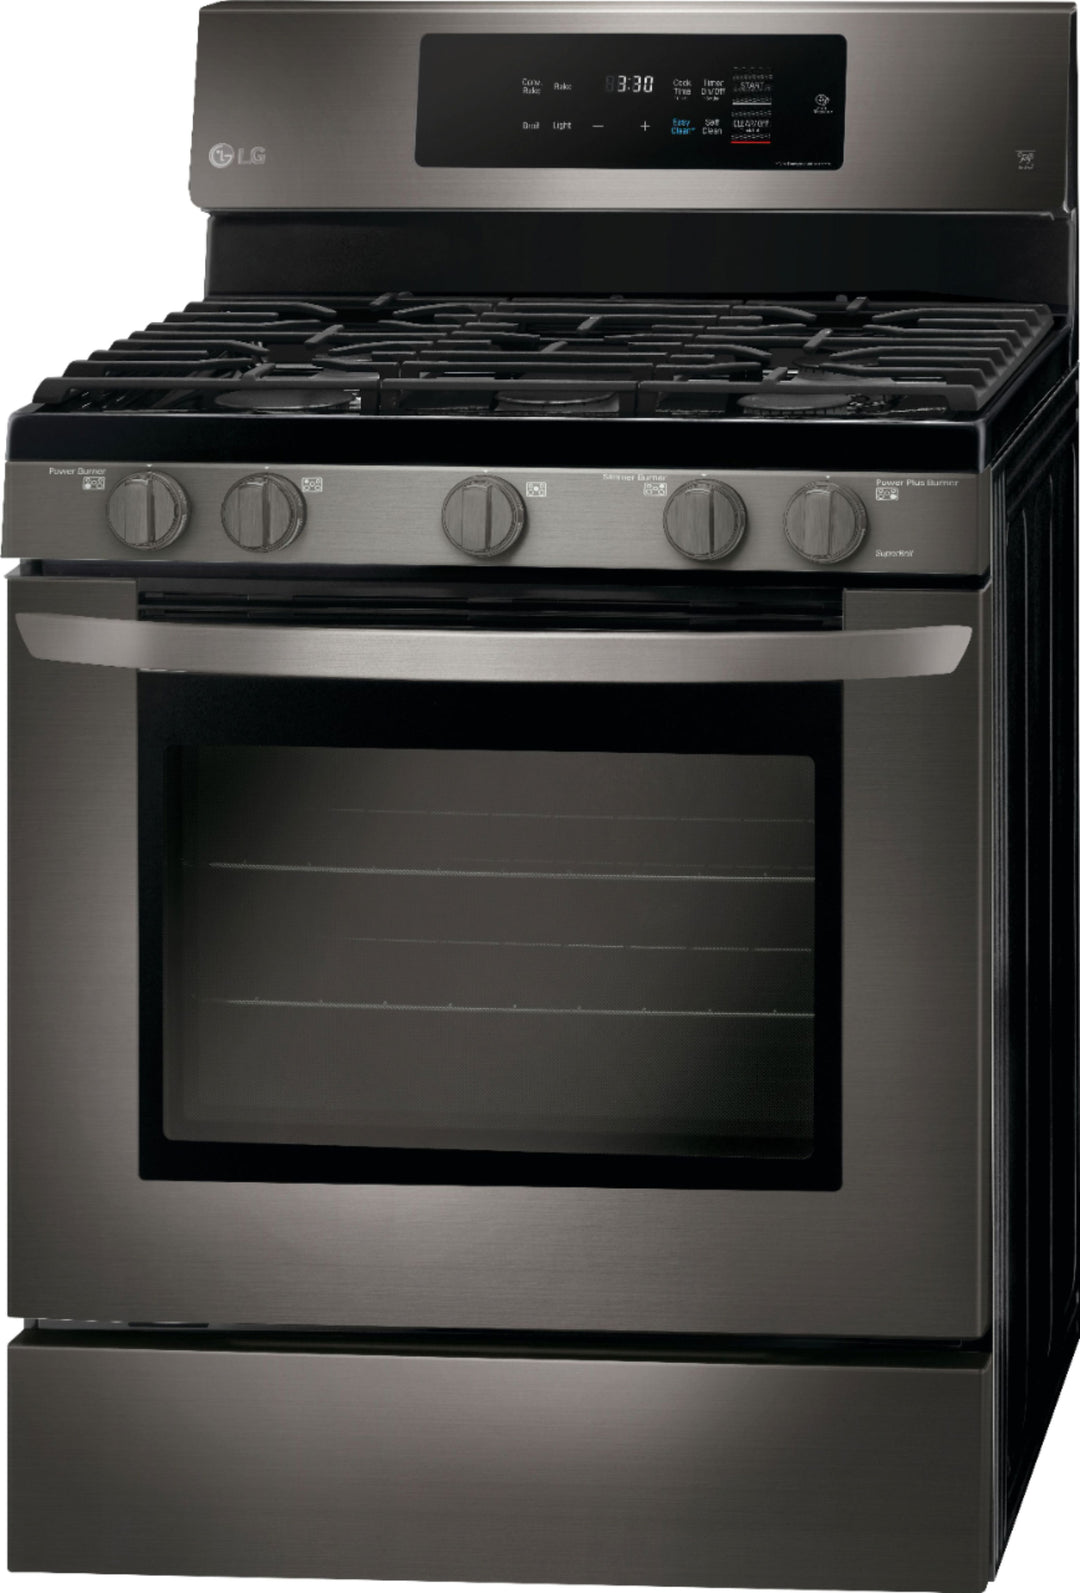 LG - 5.4 Cu. Ft. Self-Cleaning Freestanding Gas Convection Range with EasyClean - Black stainless steel_2